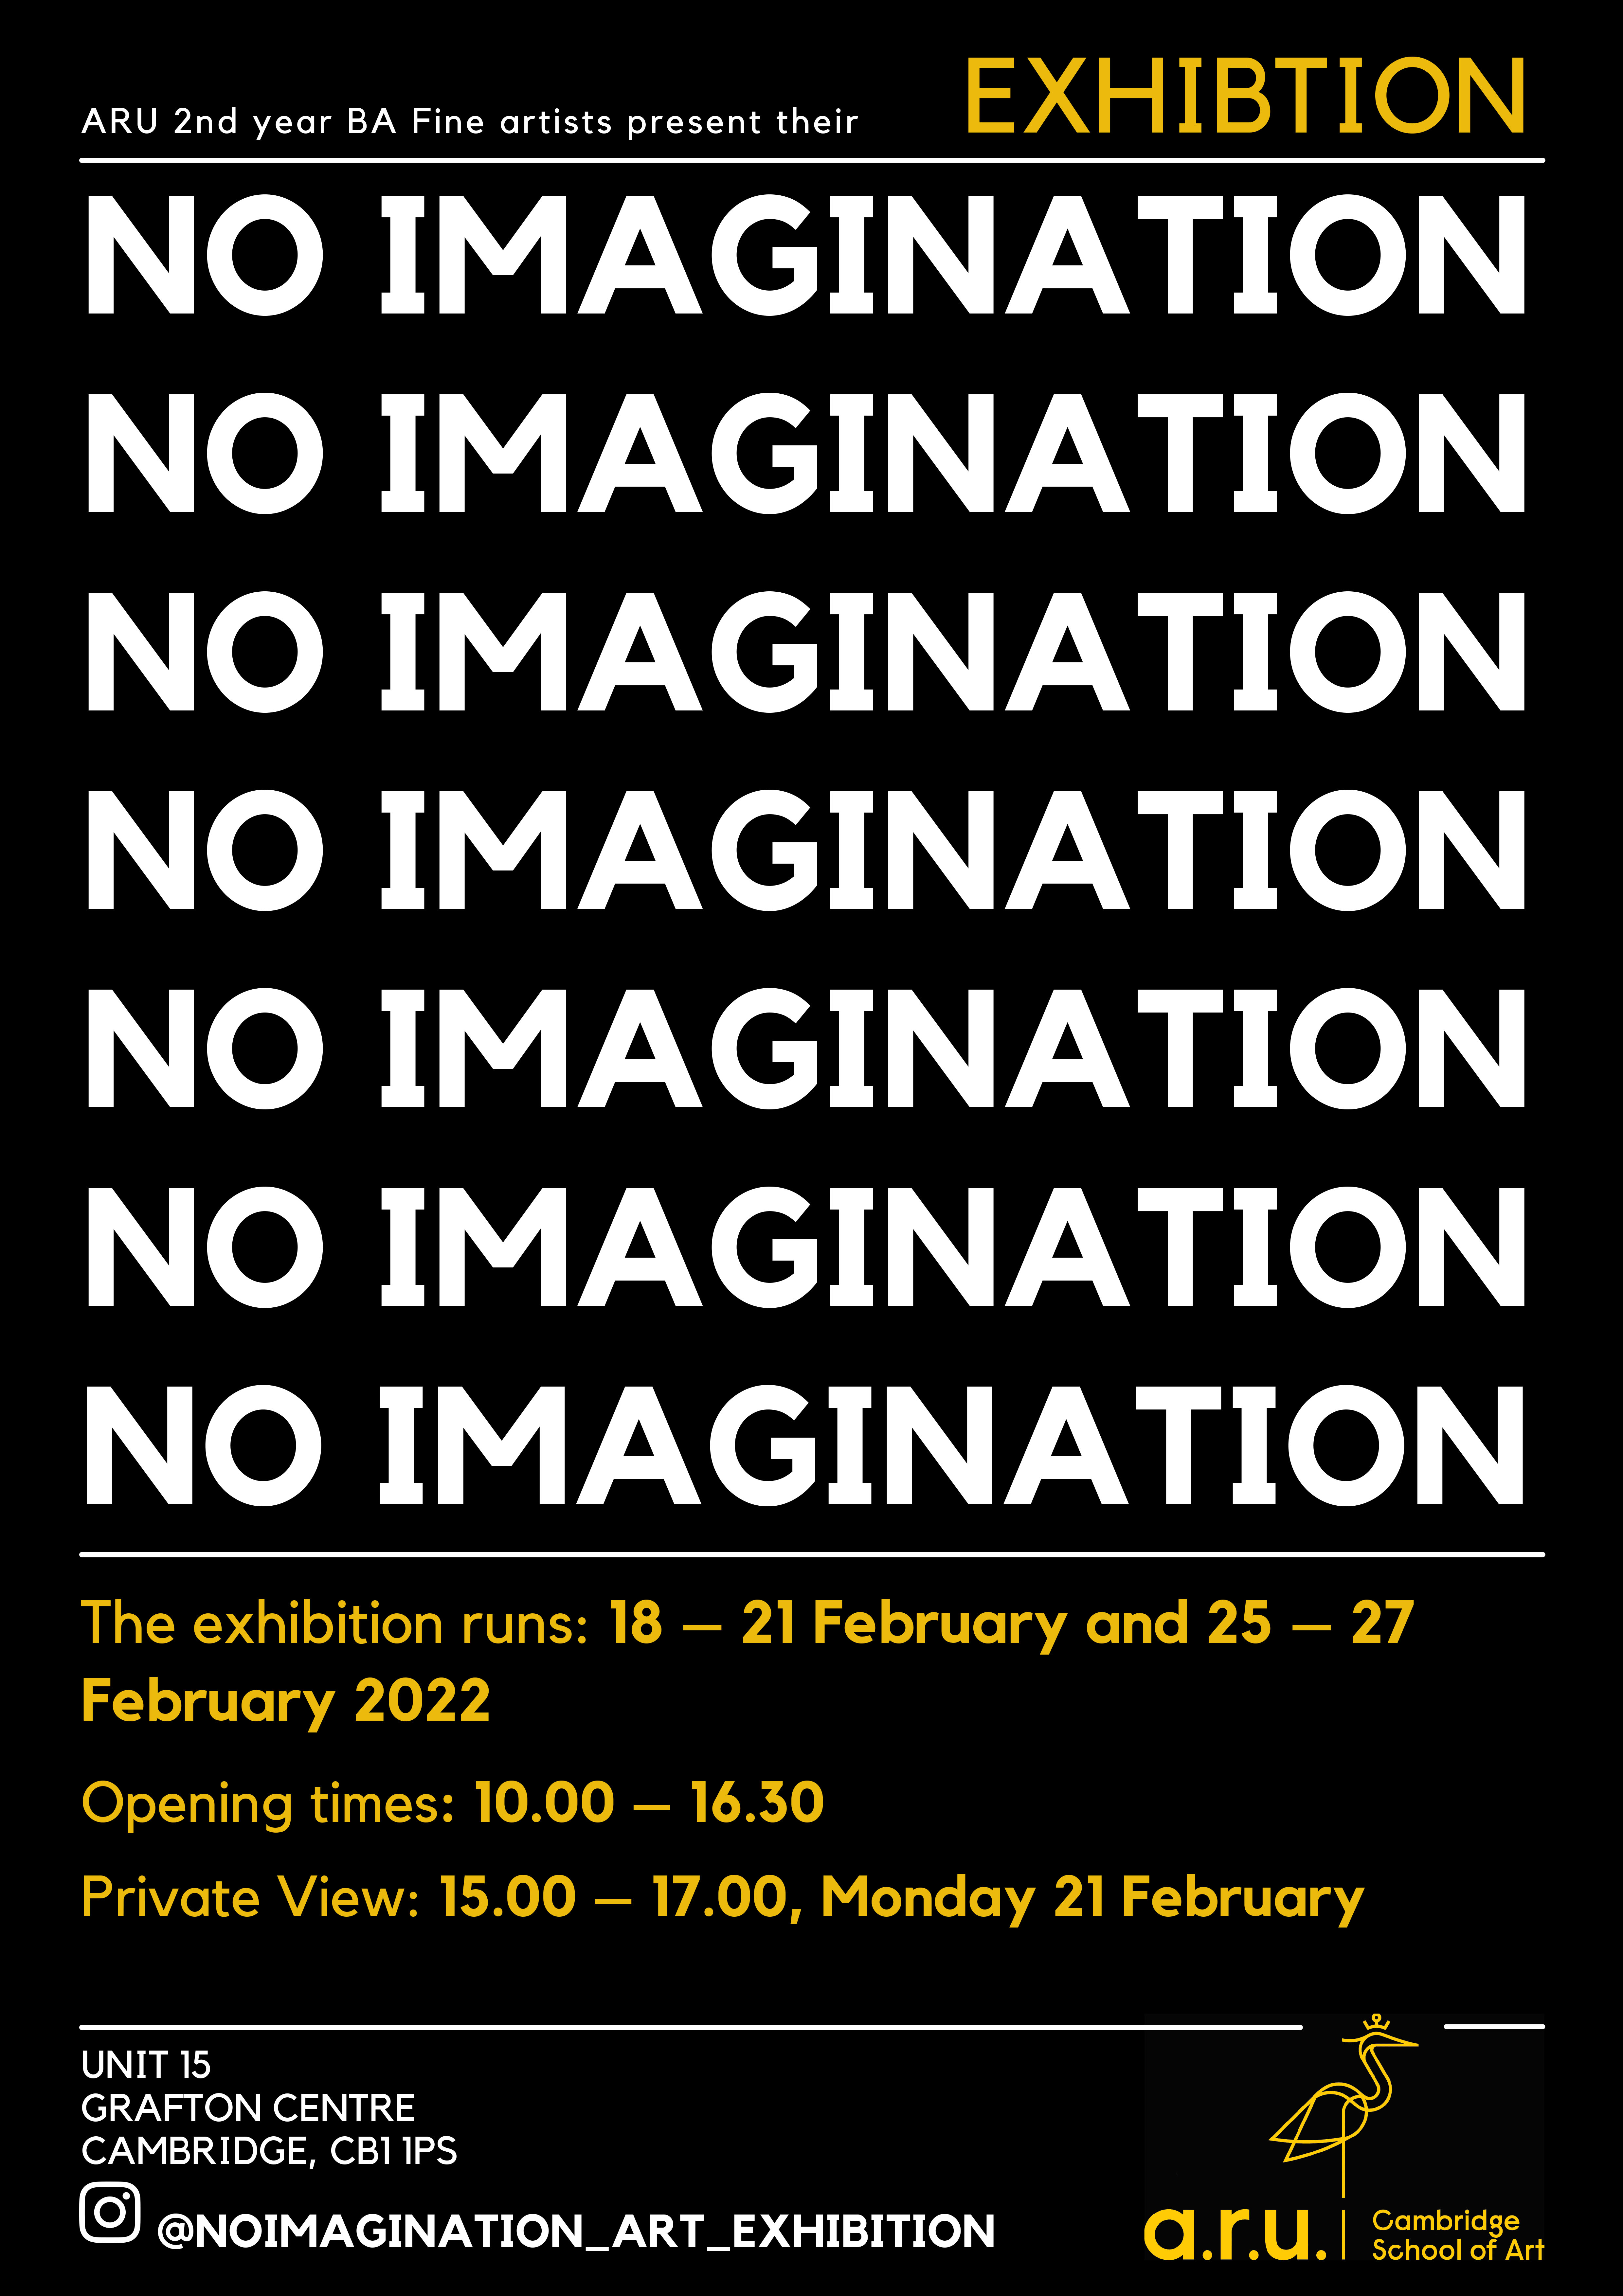 No Imagination Exhibition poster by Tian Young.